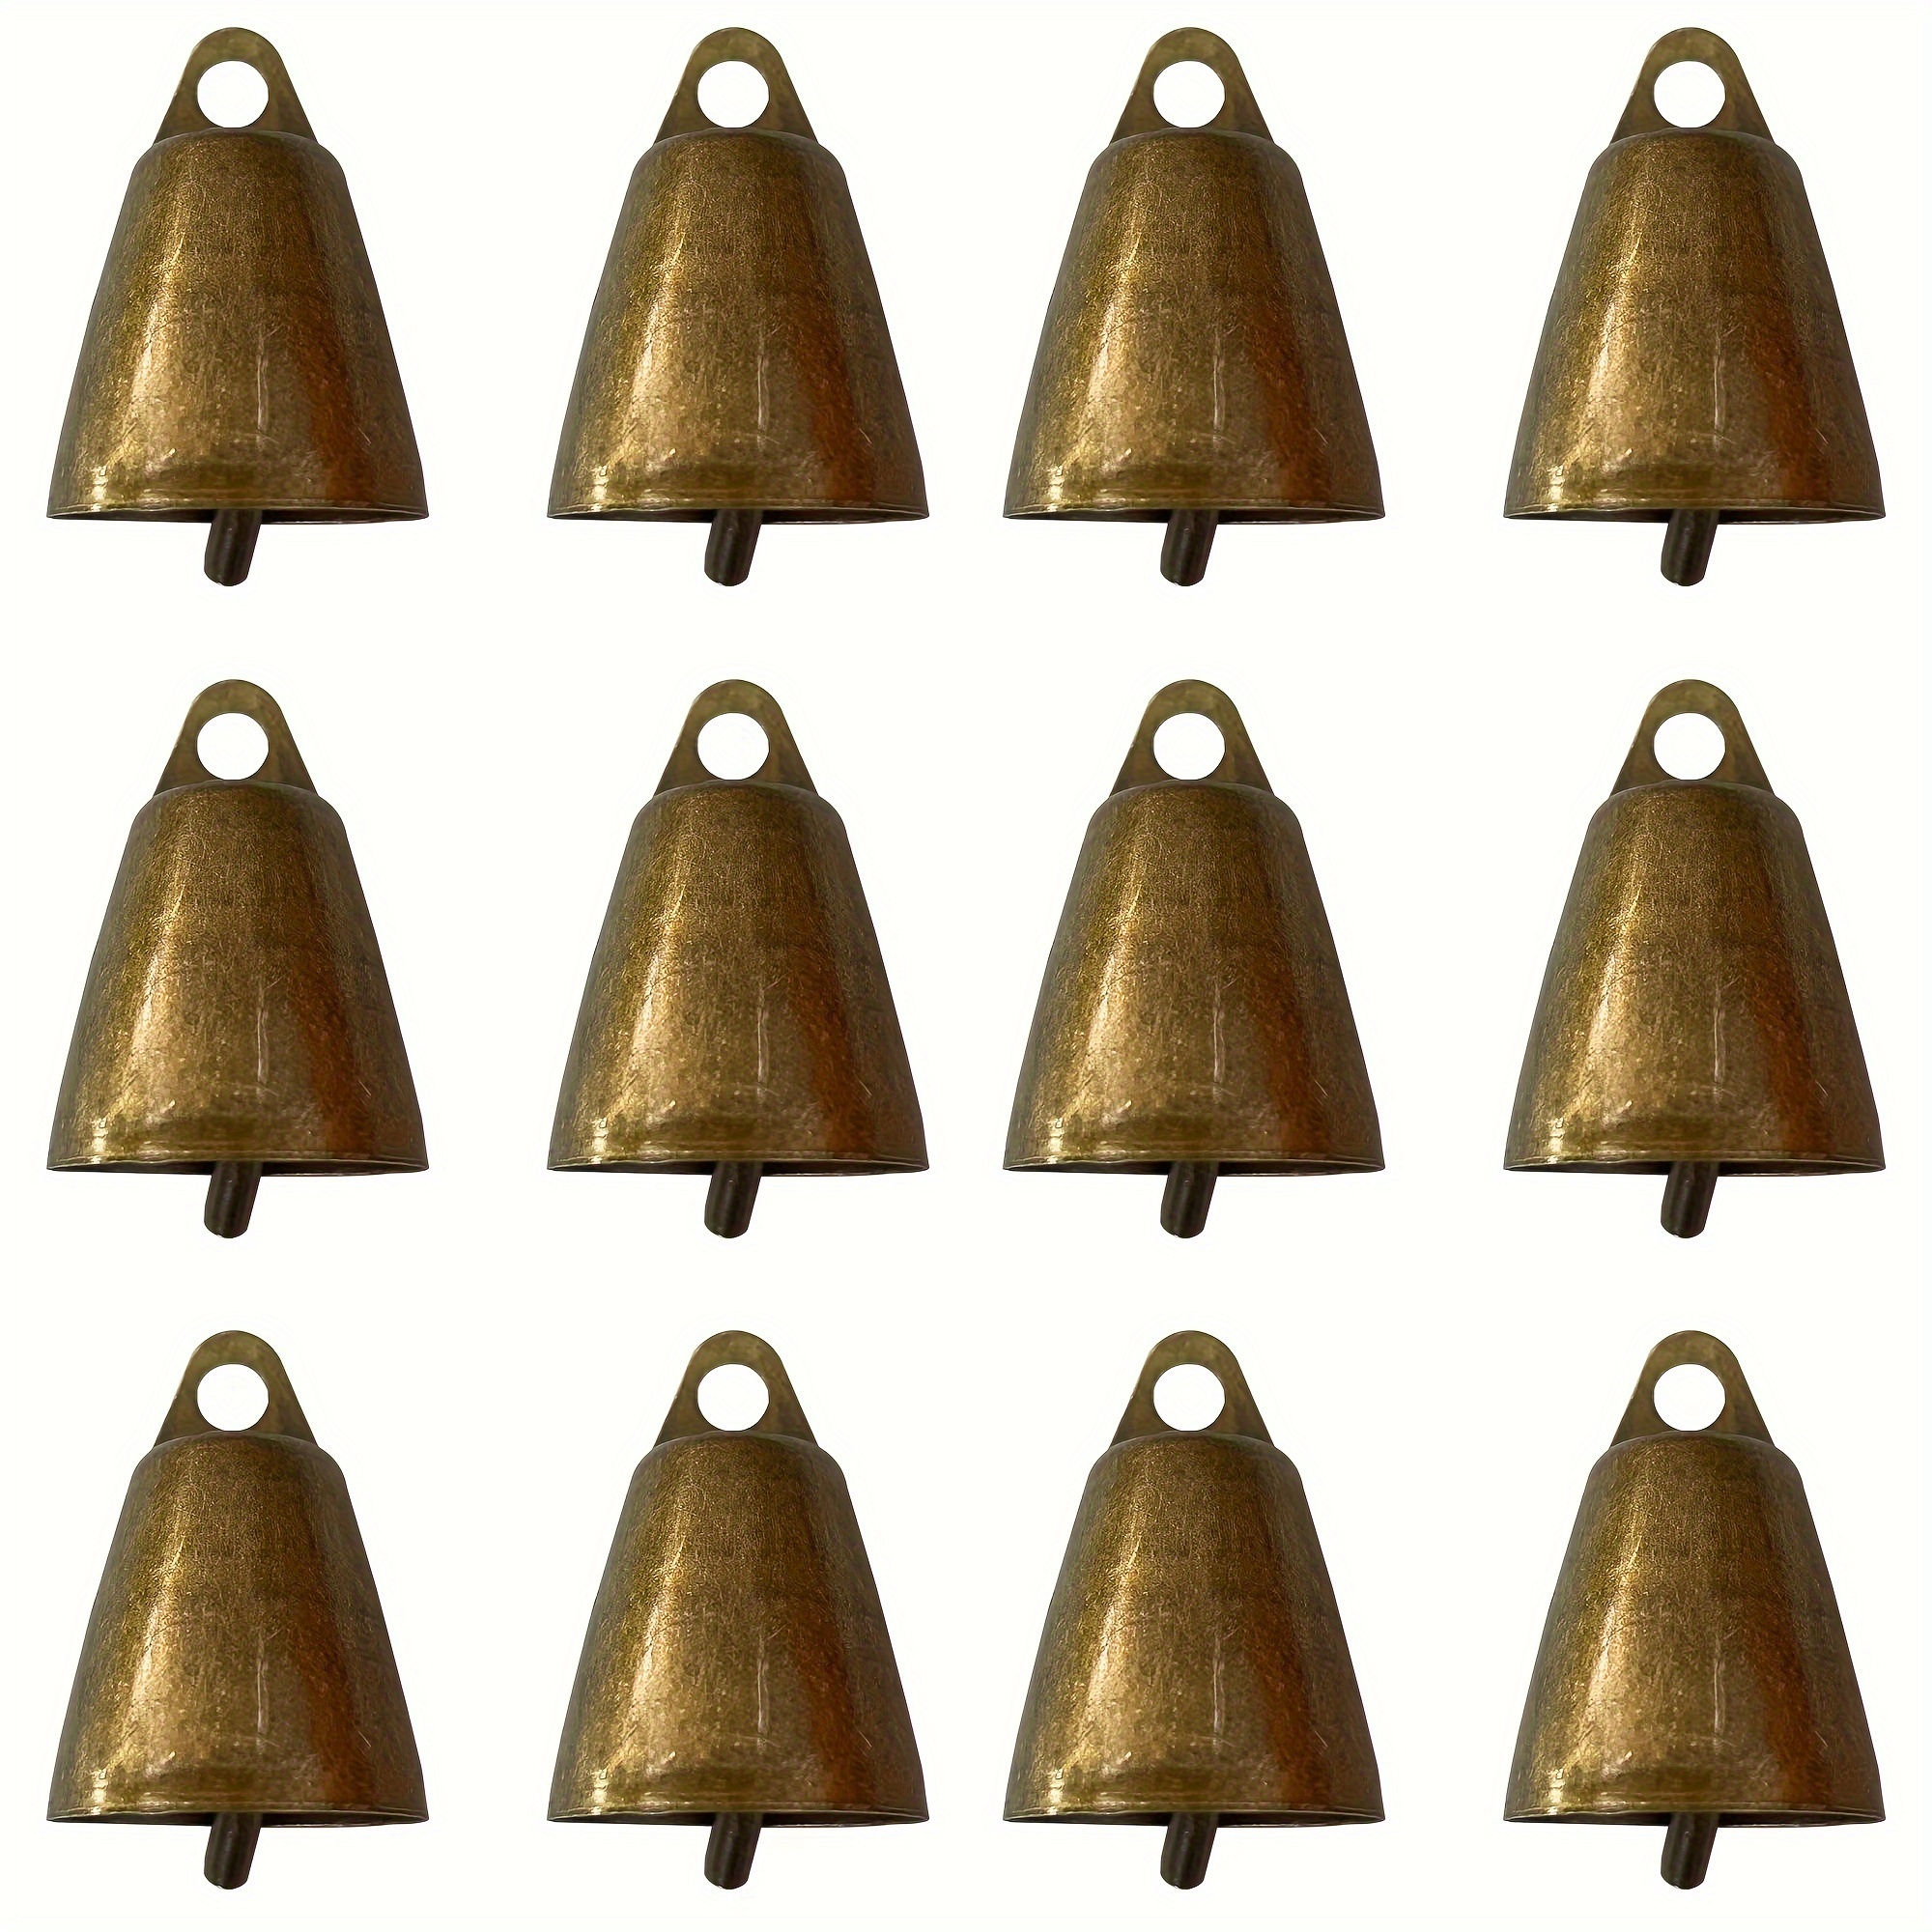 

12pcs, Rustic Bronze Metal Cow Bells, 1.4 X 1.1 Inch Dog Bells, Loud Animal Copper Bells For Cattle, Sheep, And Small Pets, Anti-theft Accessories With 0.2 Inch Hanging Loop